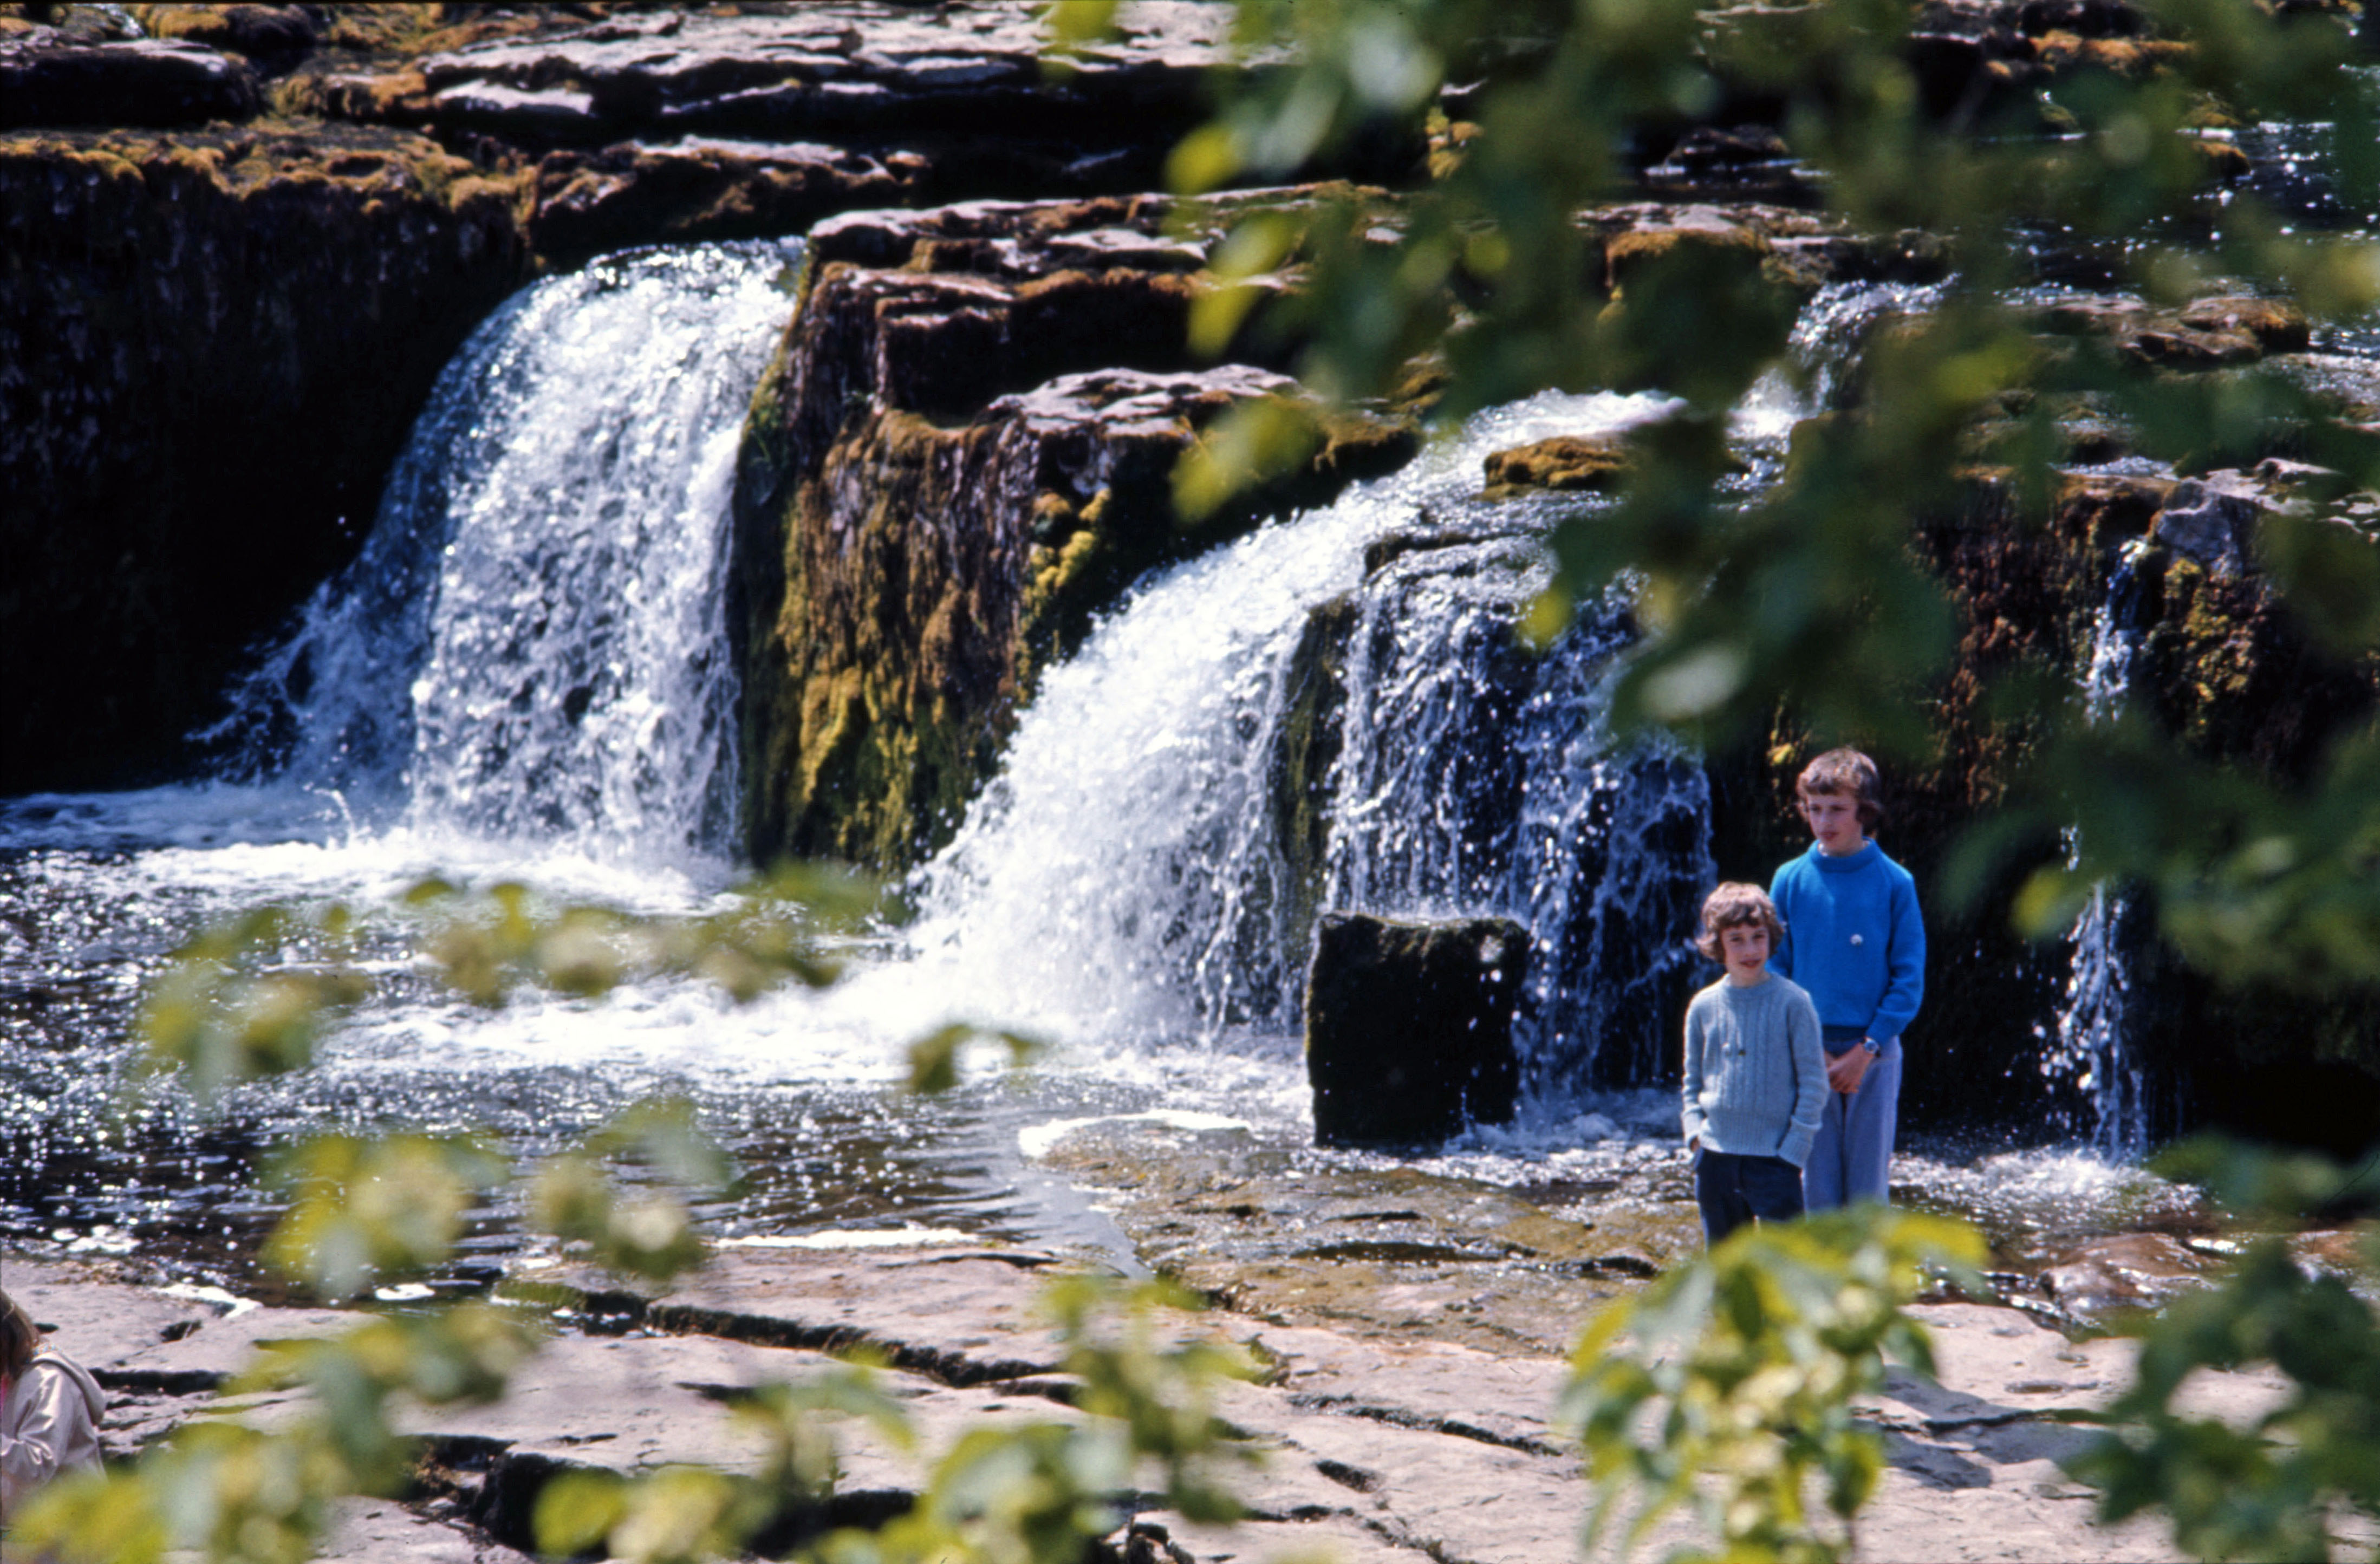 7404028 28 May 1974 - Jon and Simon standing by the Aysgarth Falls during our Youth Hostelling holiday.